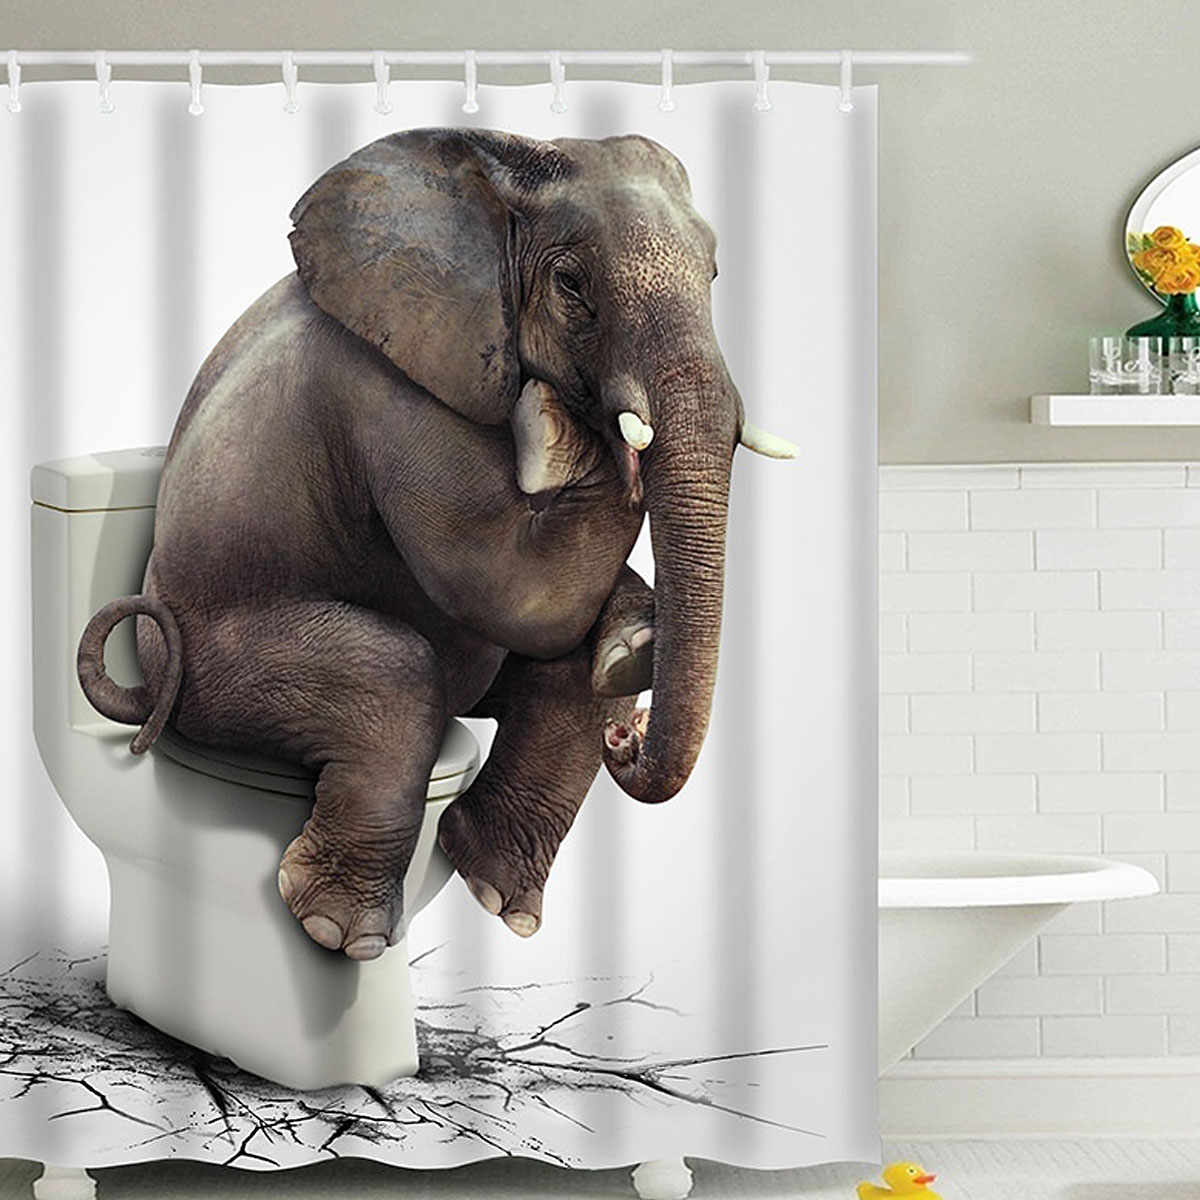 Waterproof 71"x71" Elephant Shower Curtain Bathroom Set Fabric Polyester + 12 Hooks Rings Home Decor Christmas Gift - image 1 of 5